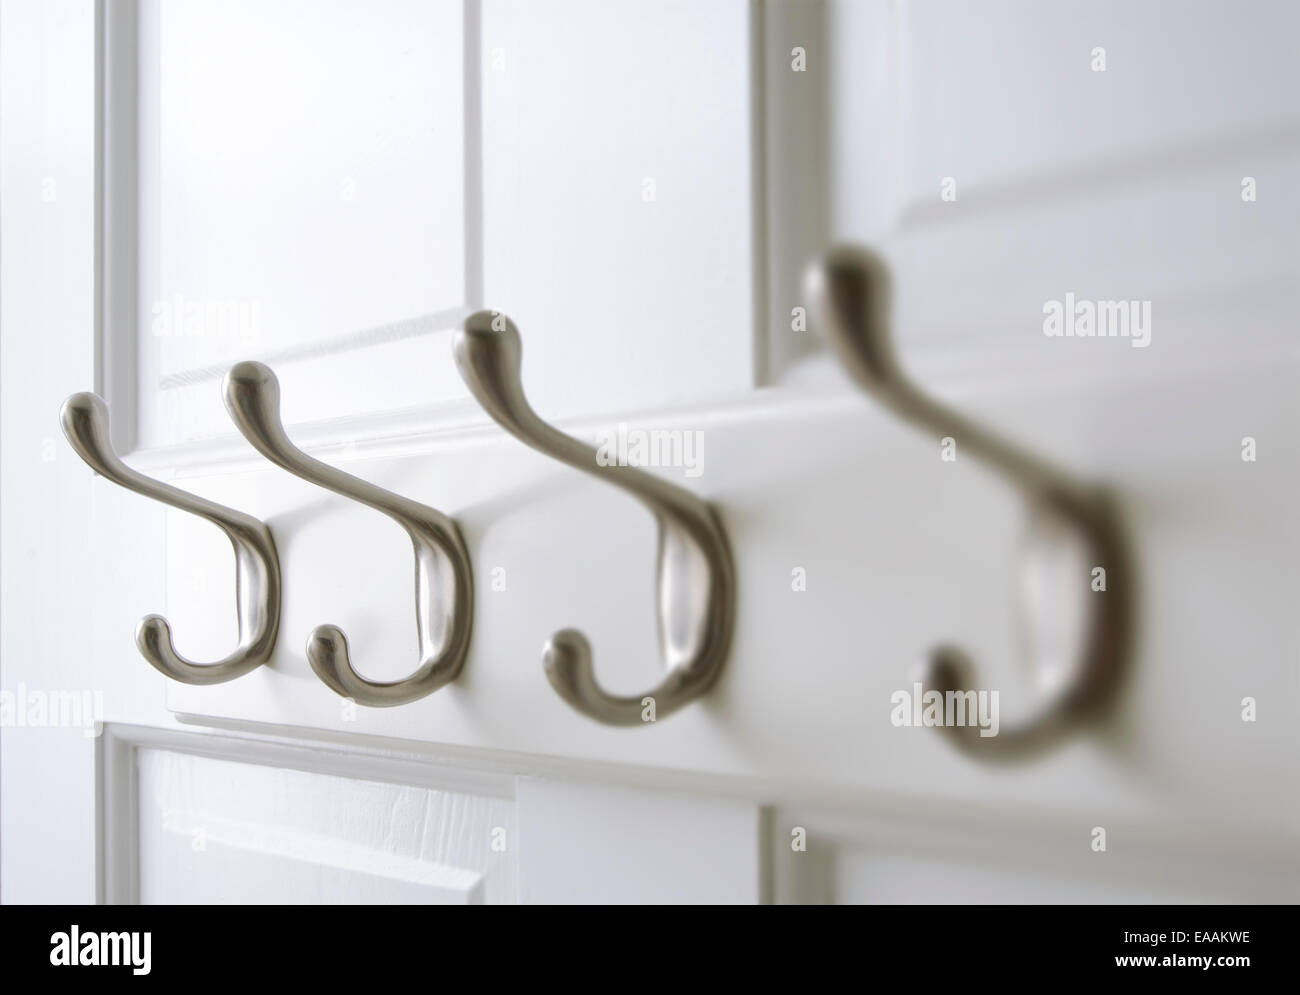 Chrome coat hooks are mounted on the back of a closet door. Stock Photo